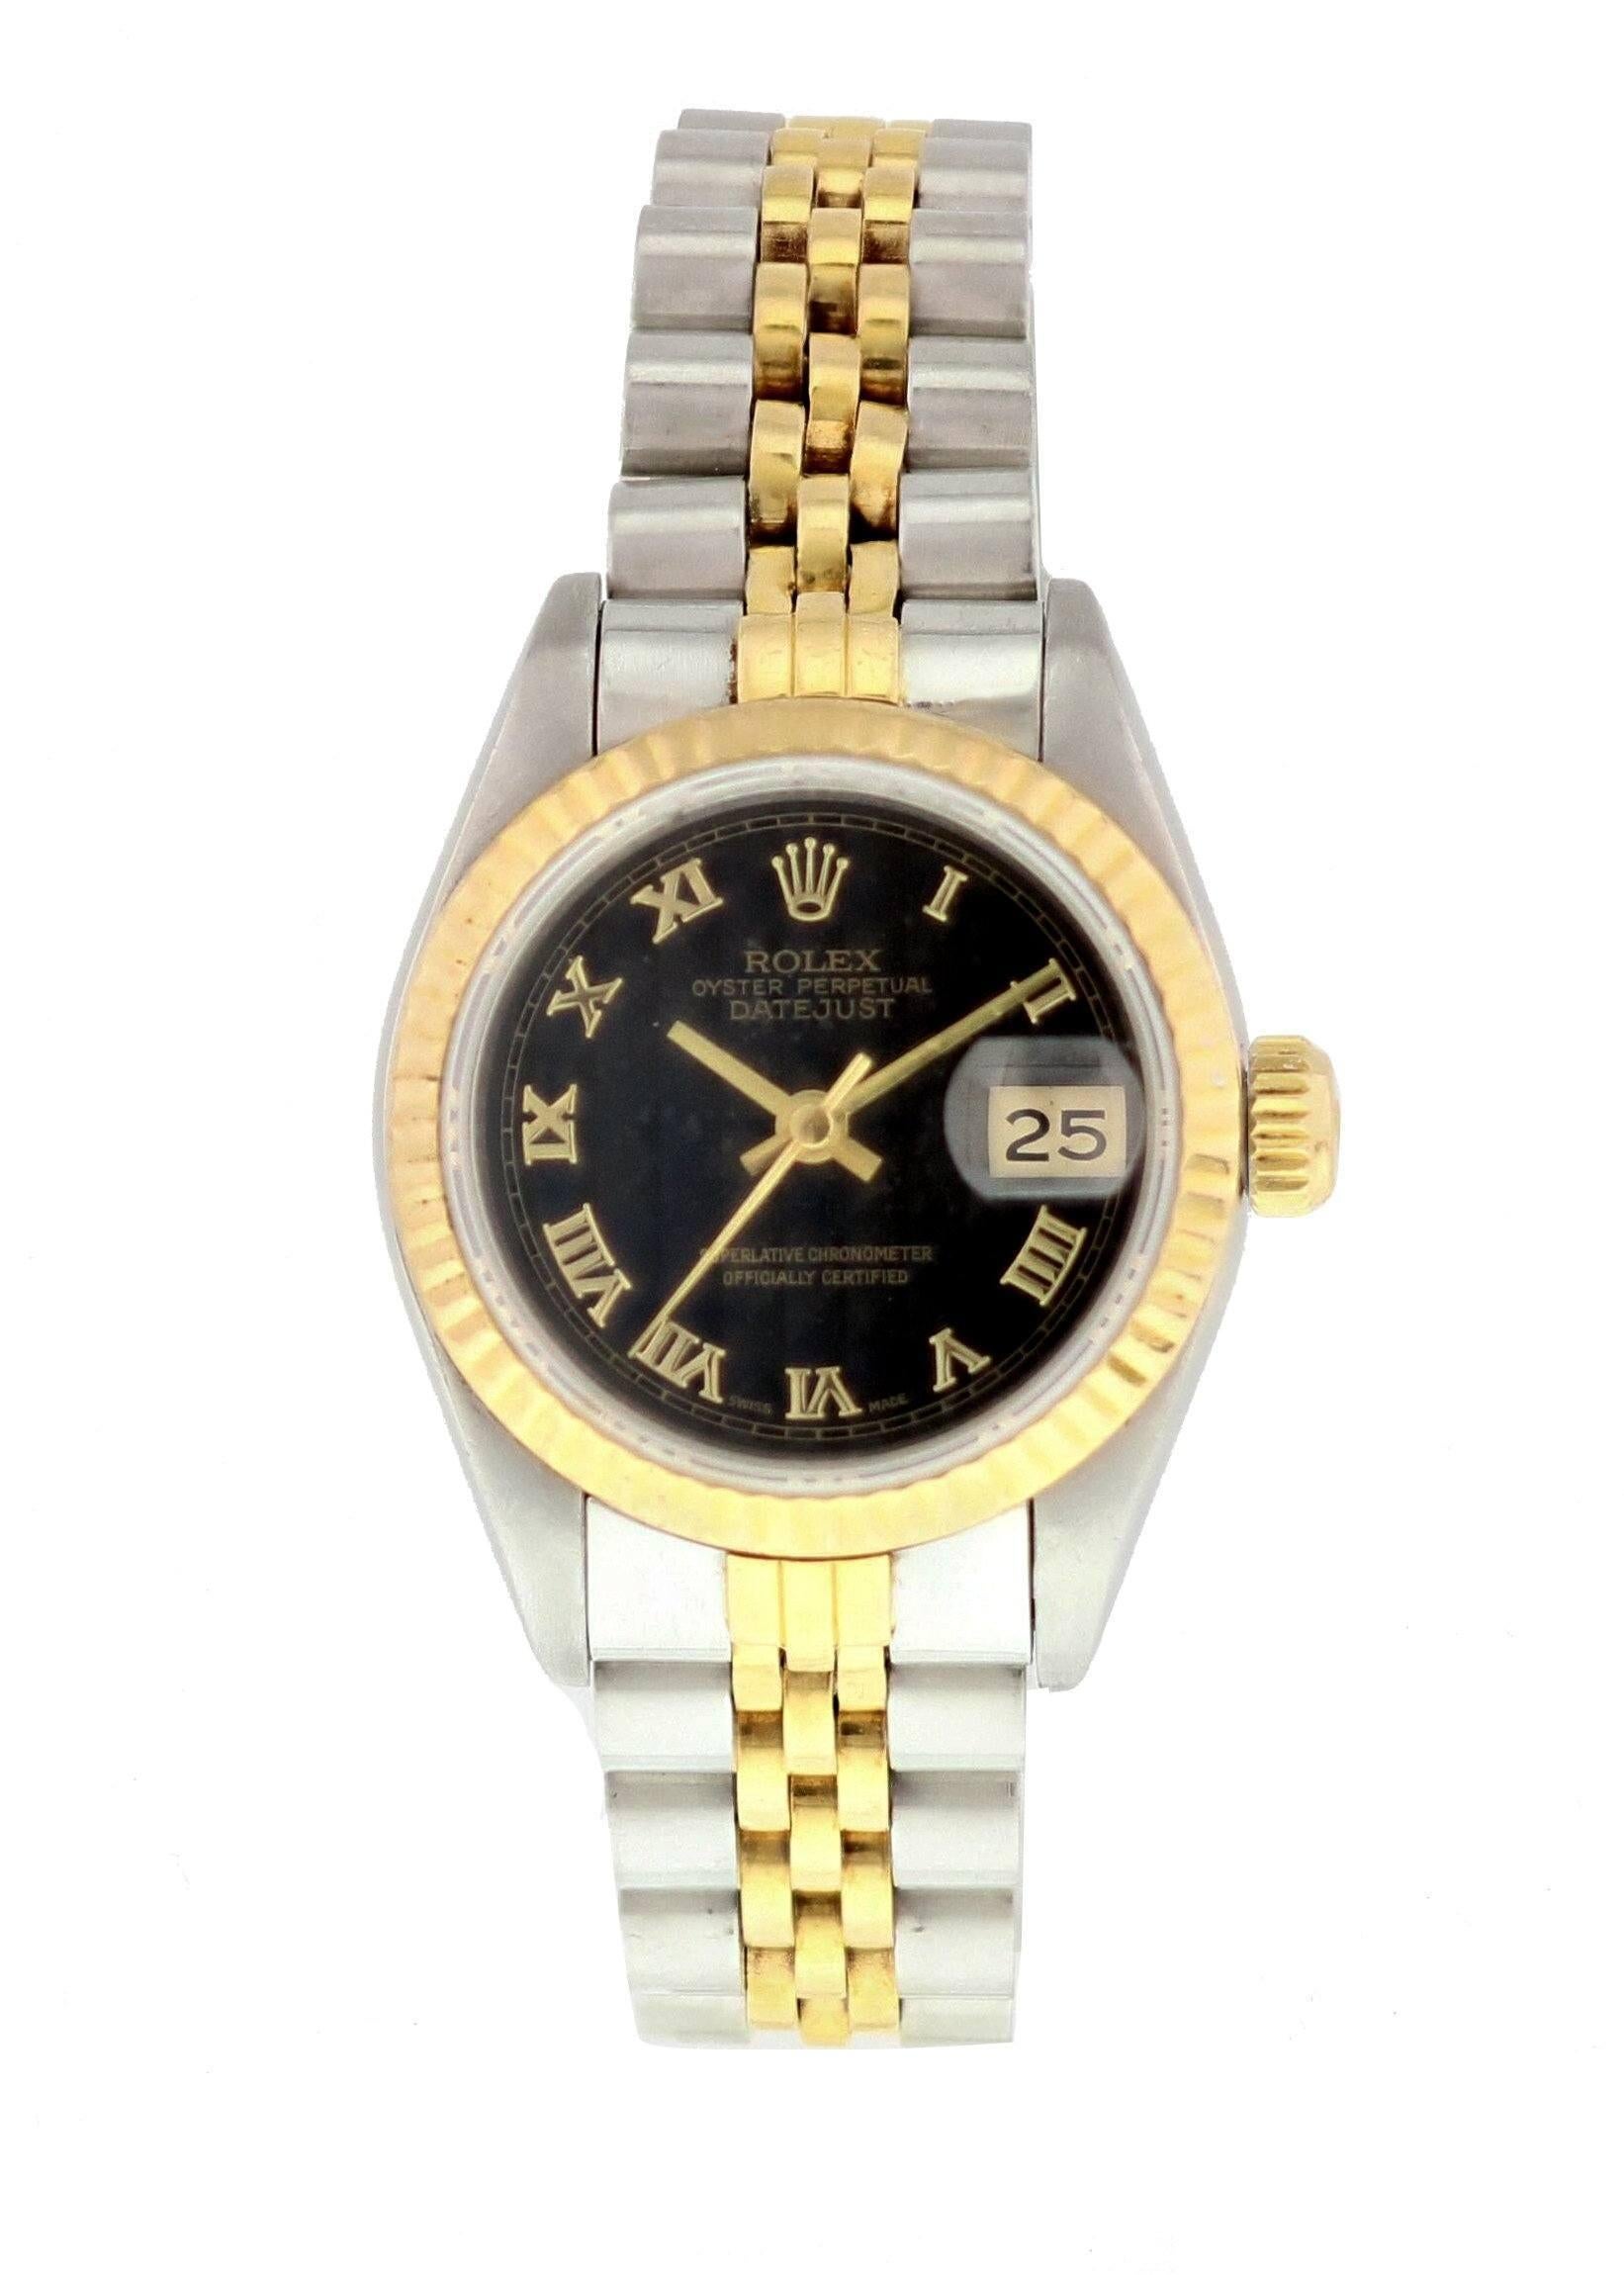 Rolex Oyster Perpetual Datejust Ladies Watch. 26 mm stainless steel case. 18k yellow gold fluted bezel. Black pyramid dial with yellow gold hands and Roman numeral hour markers. 18k yellow gold and stainless steel Jubilee band with a stainless steel